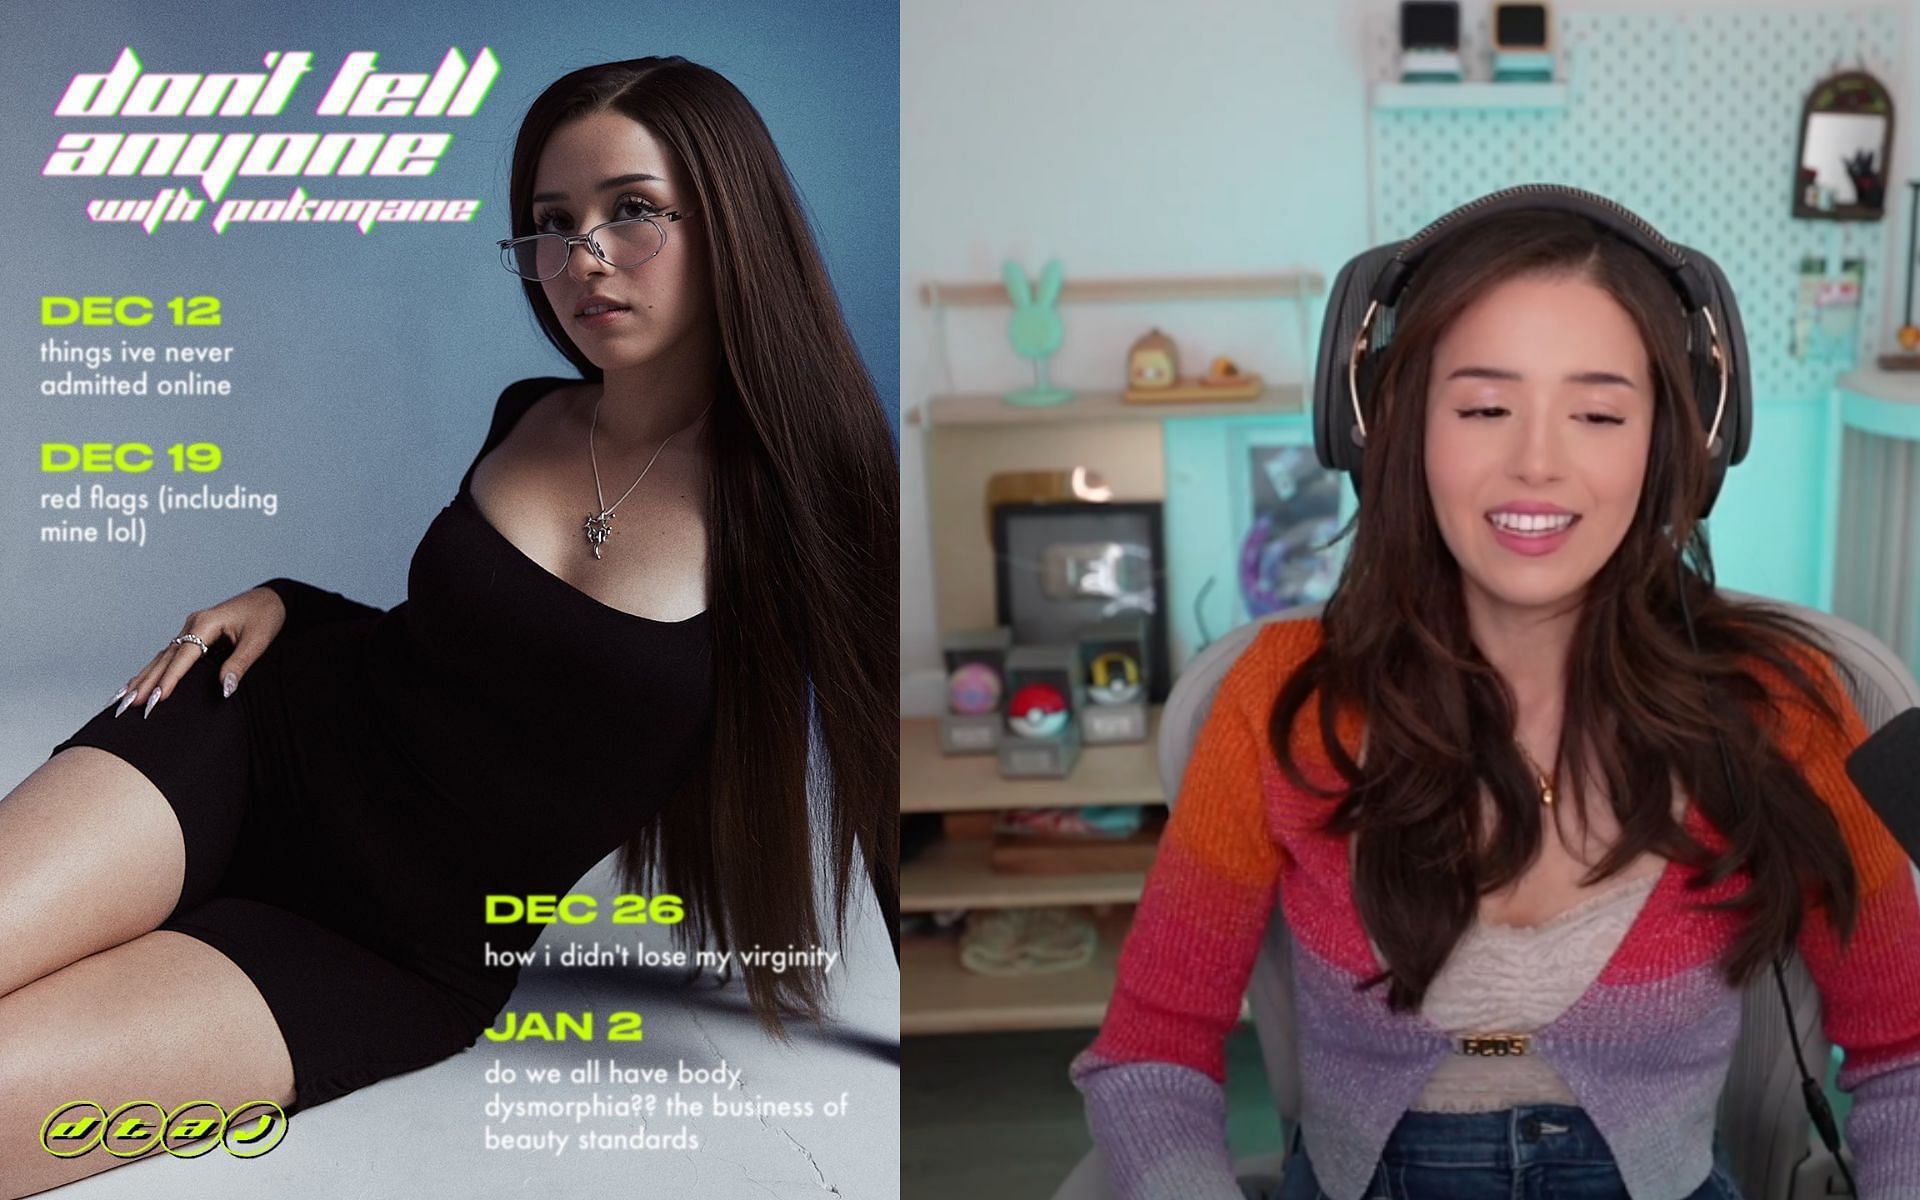 Fans give a positive review to Pokimane